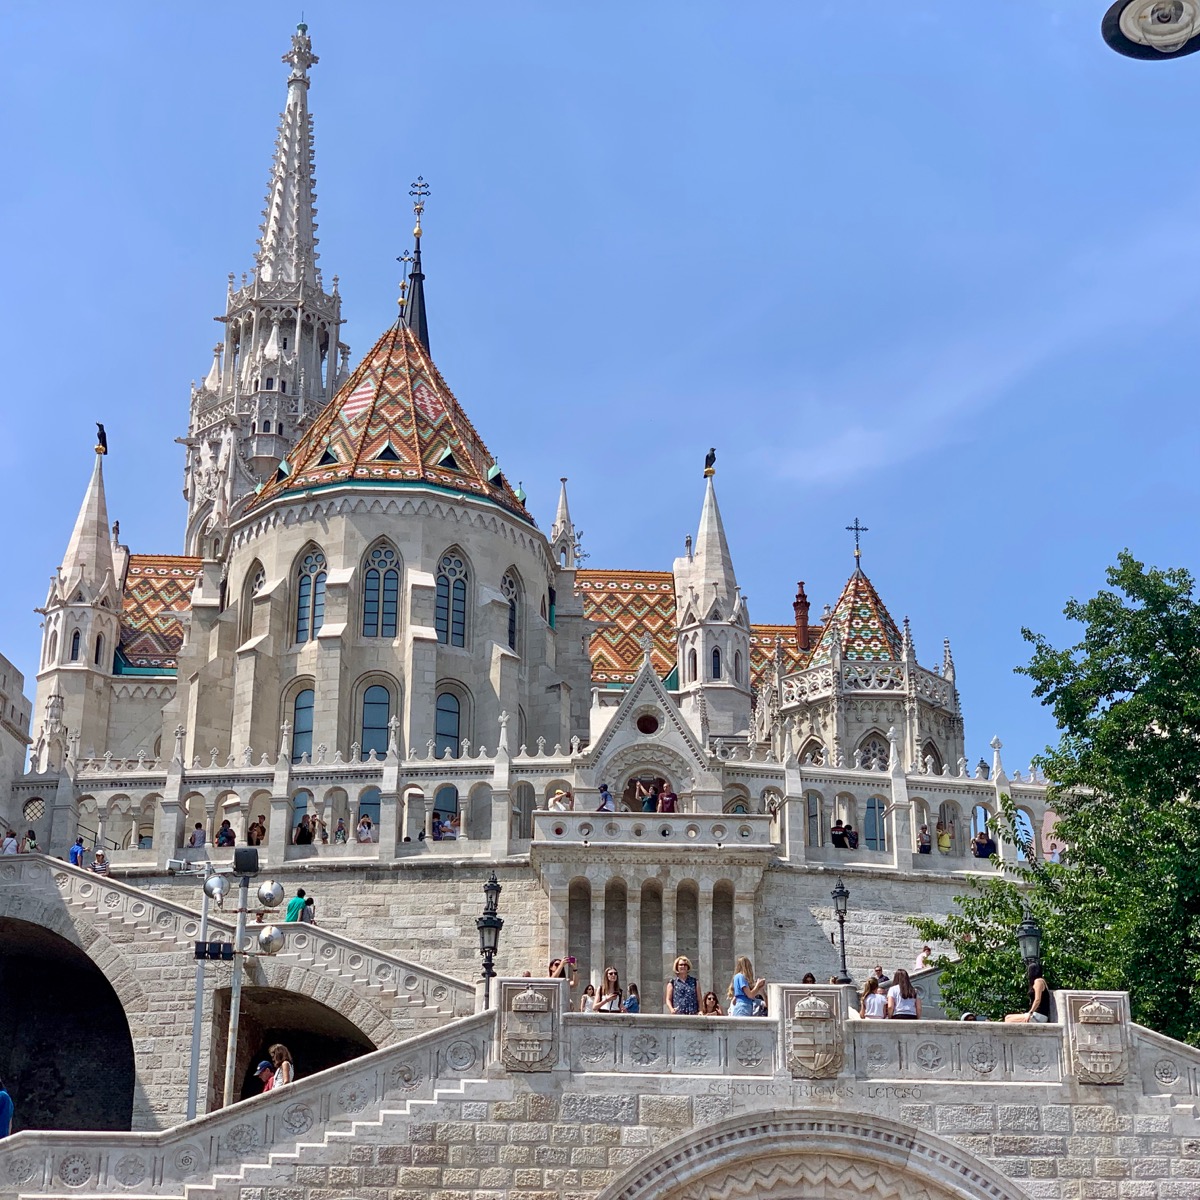 Another view of Matthias Church in Budapest